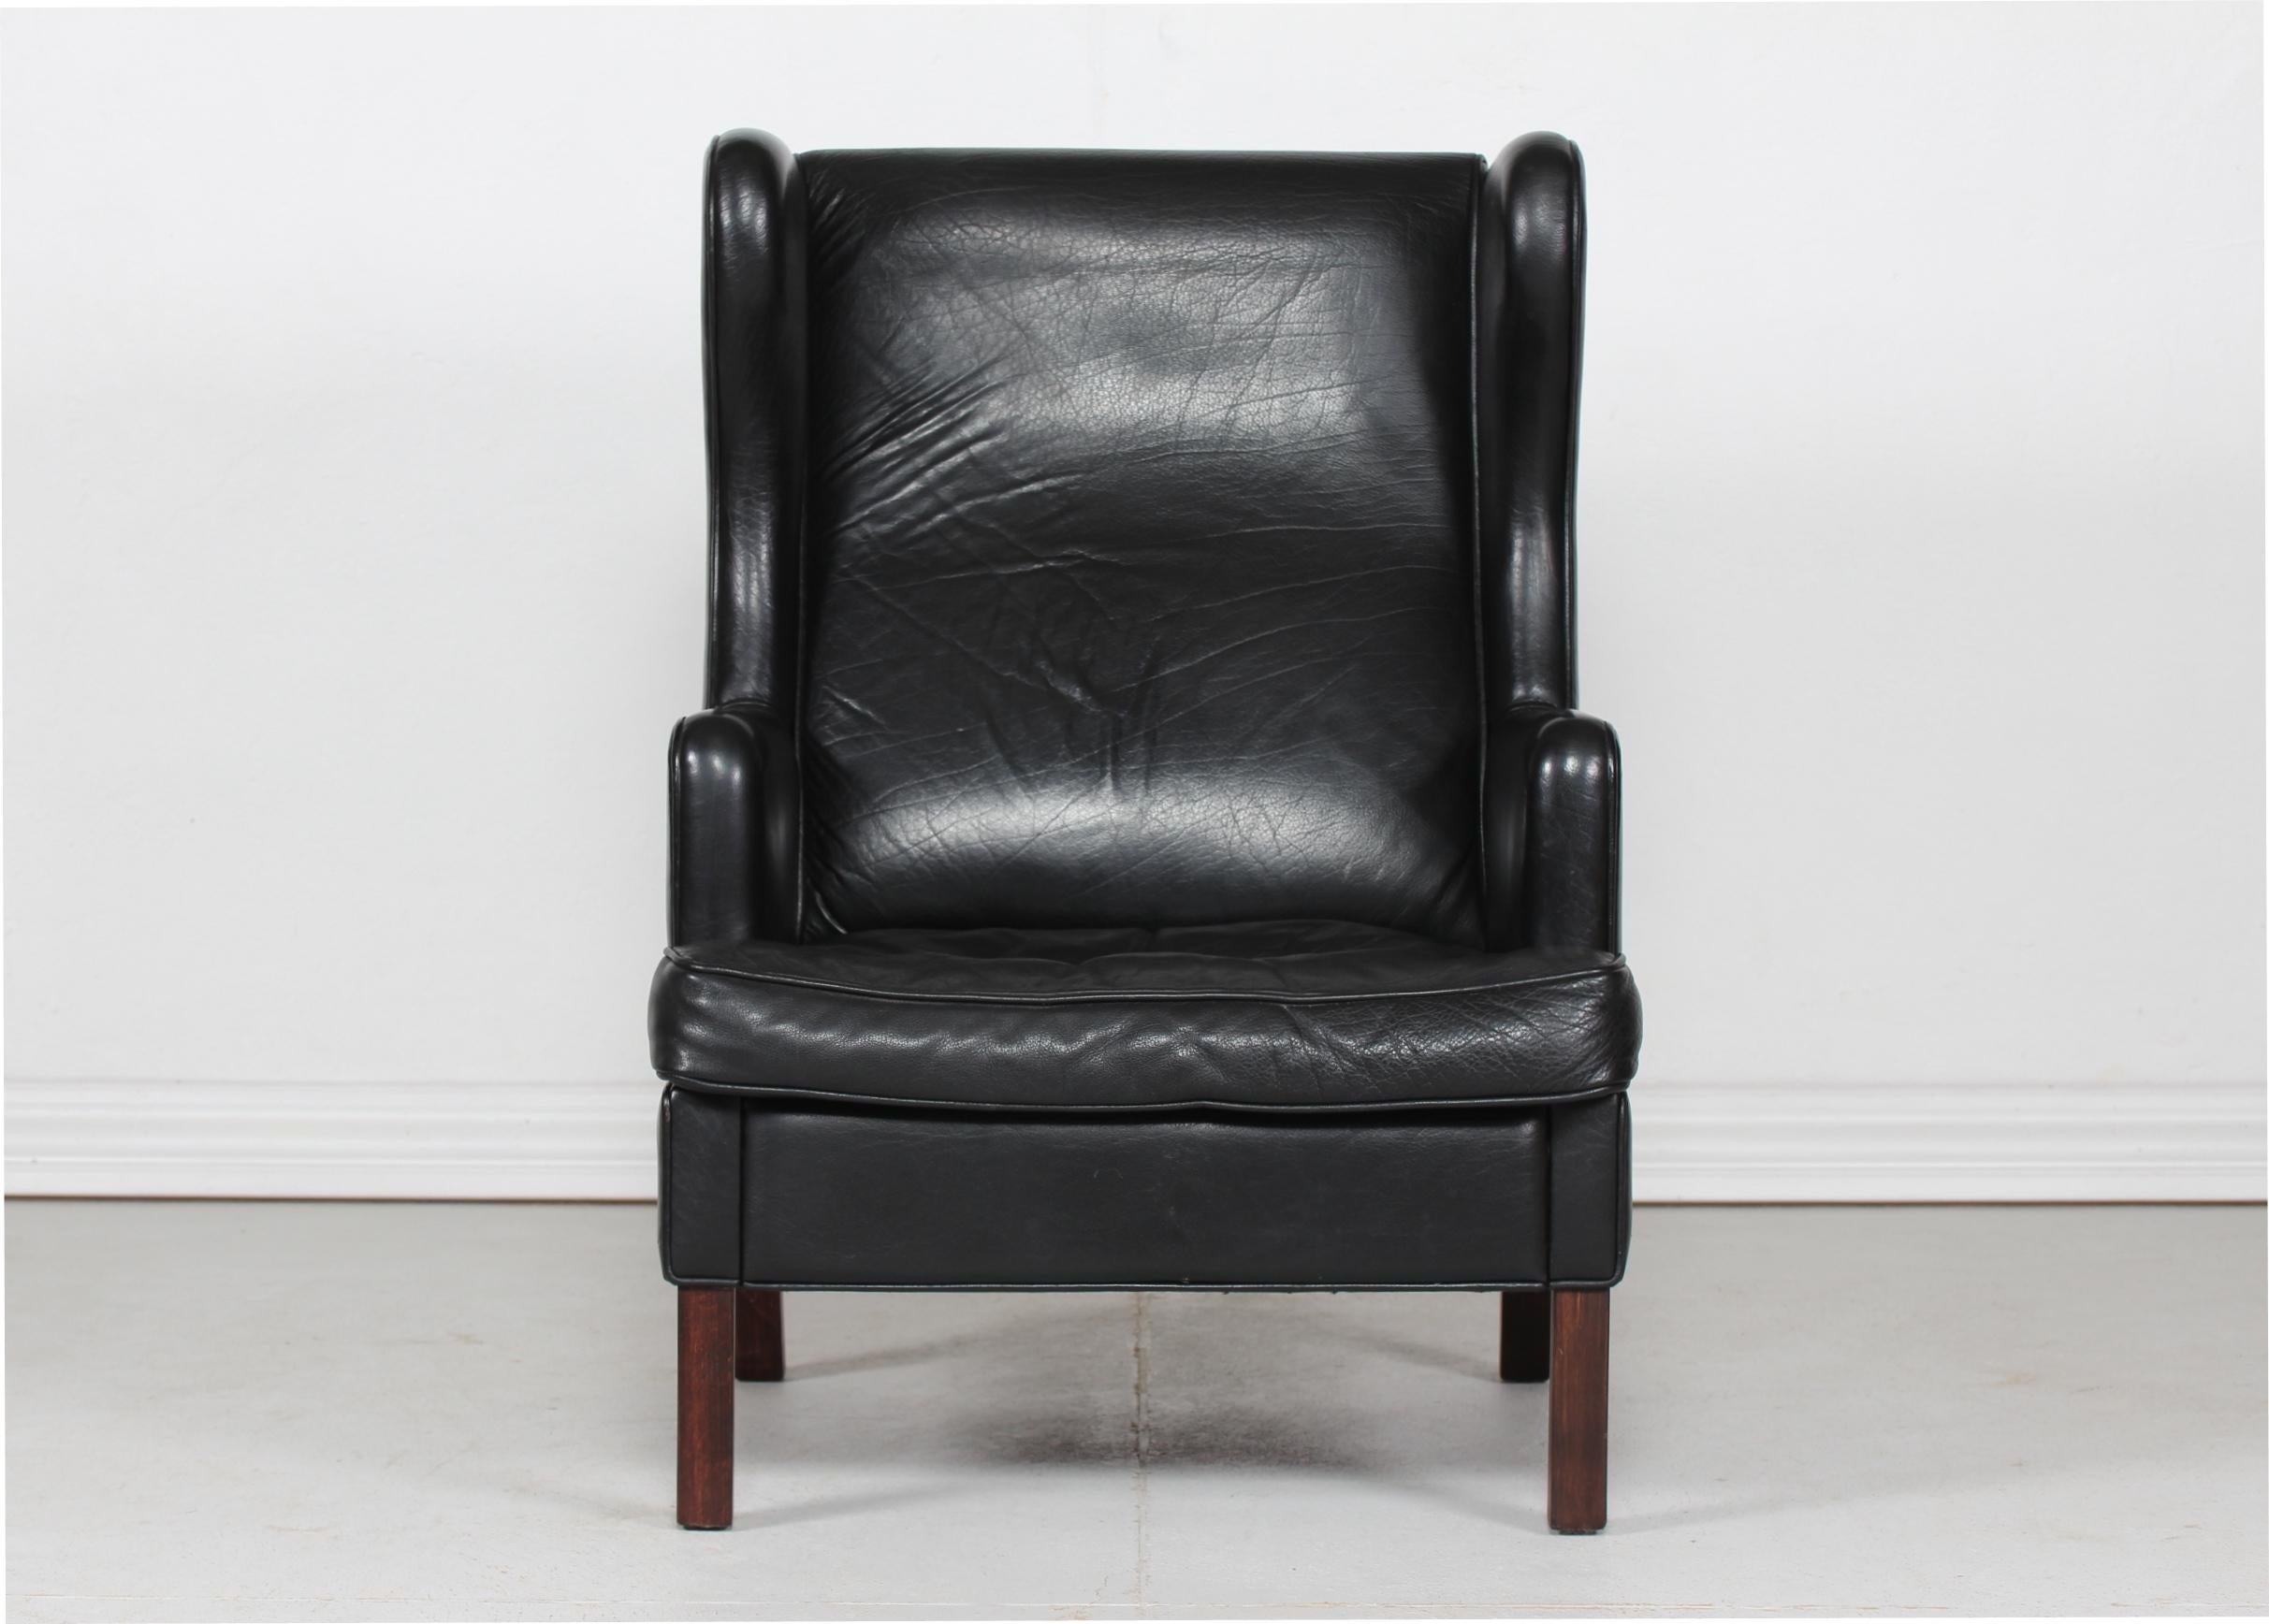 Danish modern wing chair with stool in Kaare Klint style.
The comfortable chair and stool is upholstered with black leather in strong quality.
The legs are made of dark stained beech wood.

Measurements stool
Height 40 cm
Width 58 cm
Depth 46